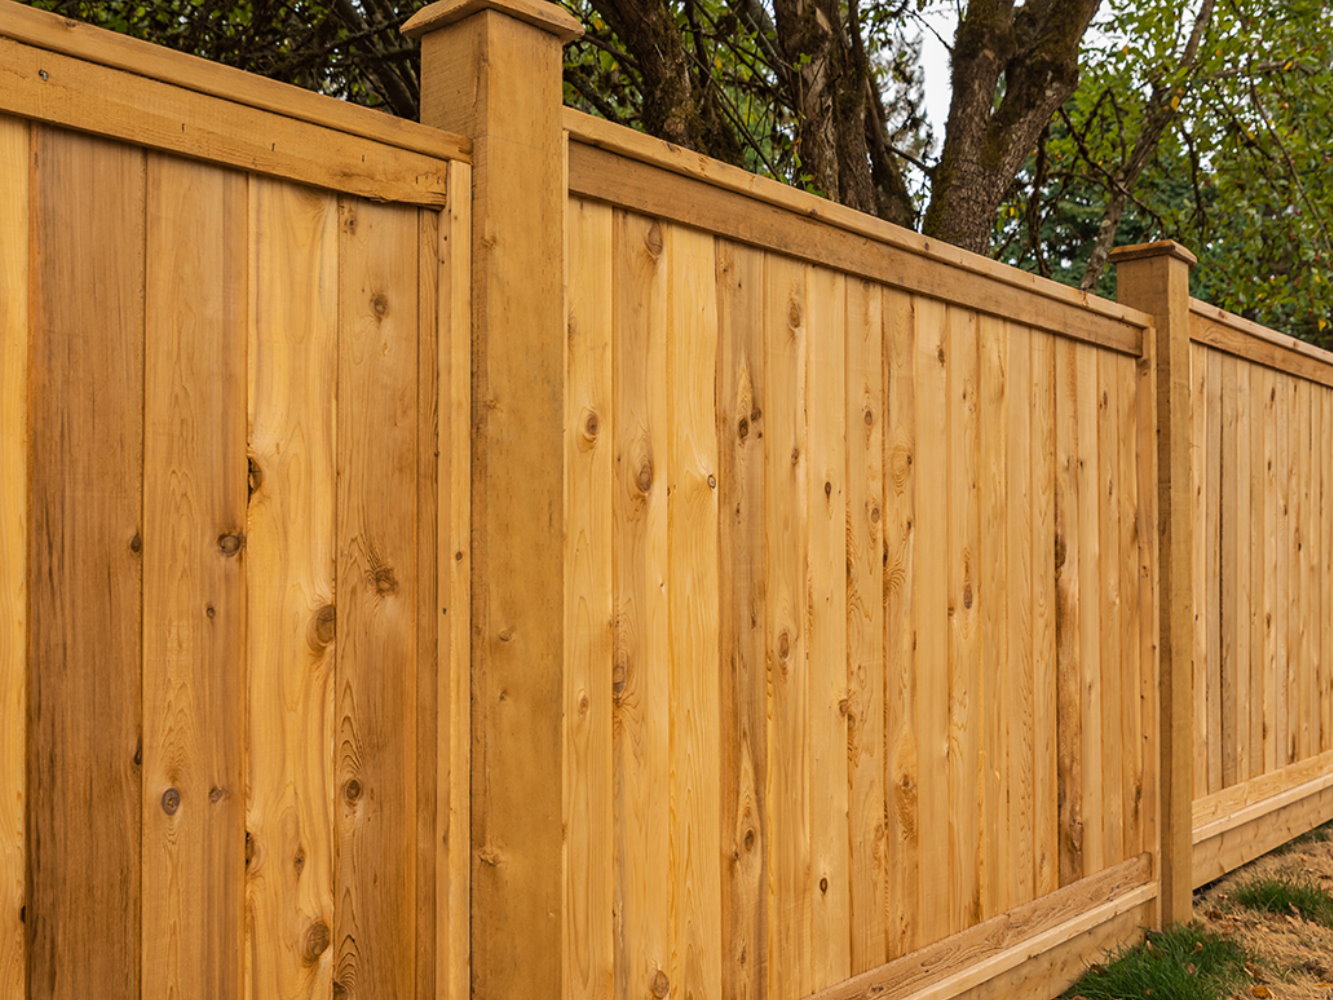 Henrico County VA cap and trim style wood fence